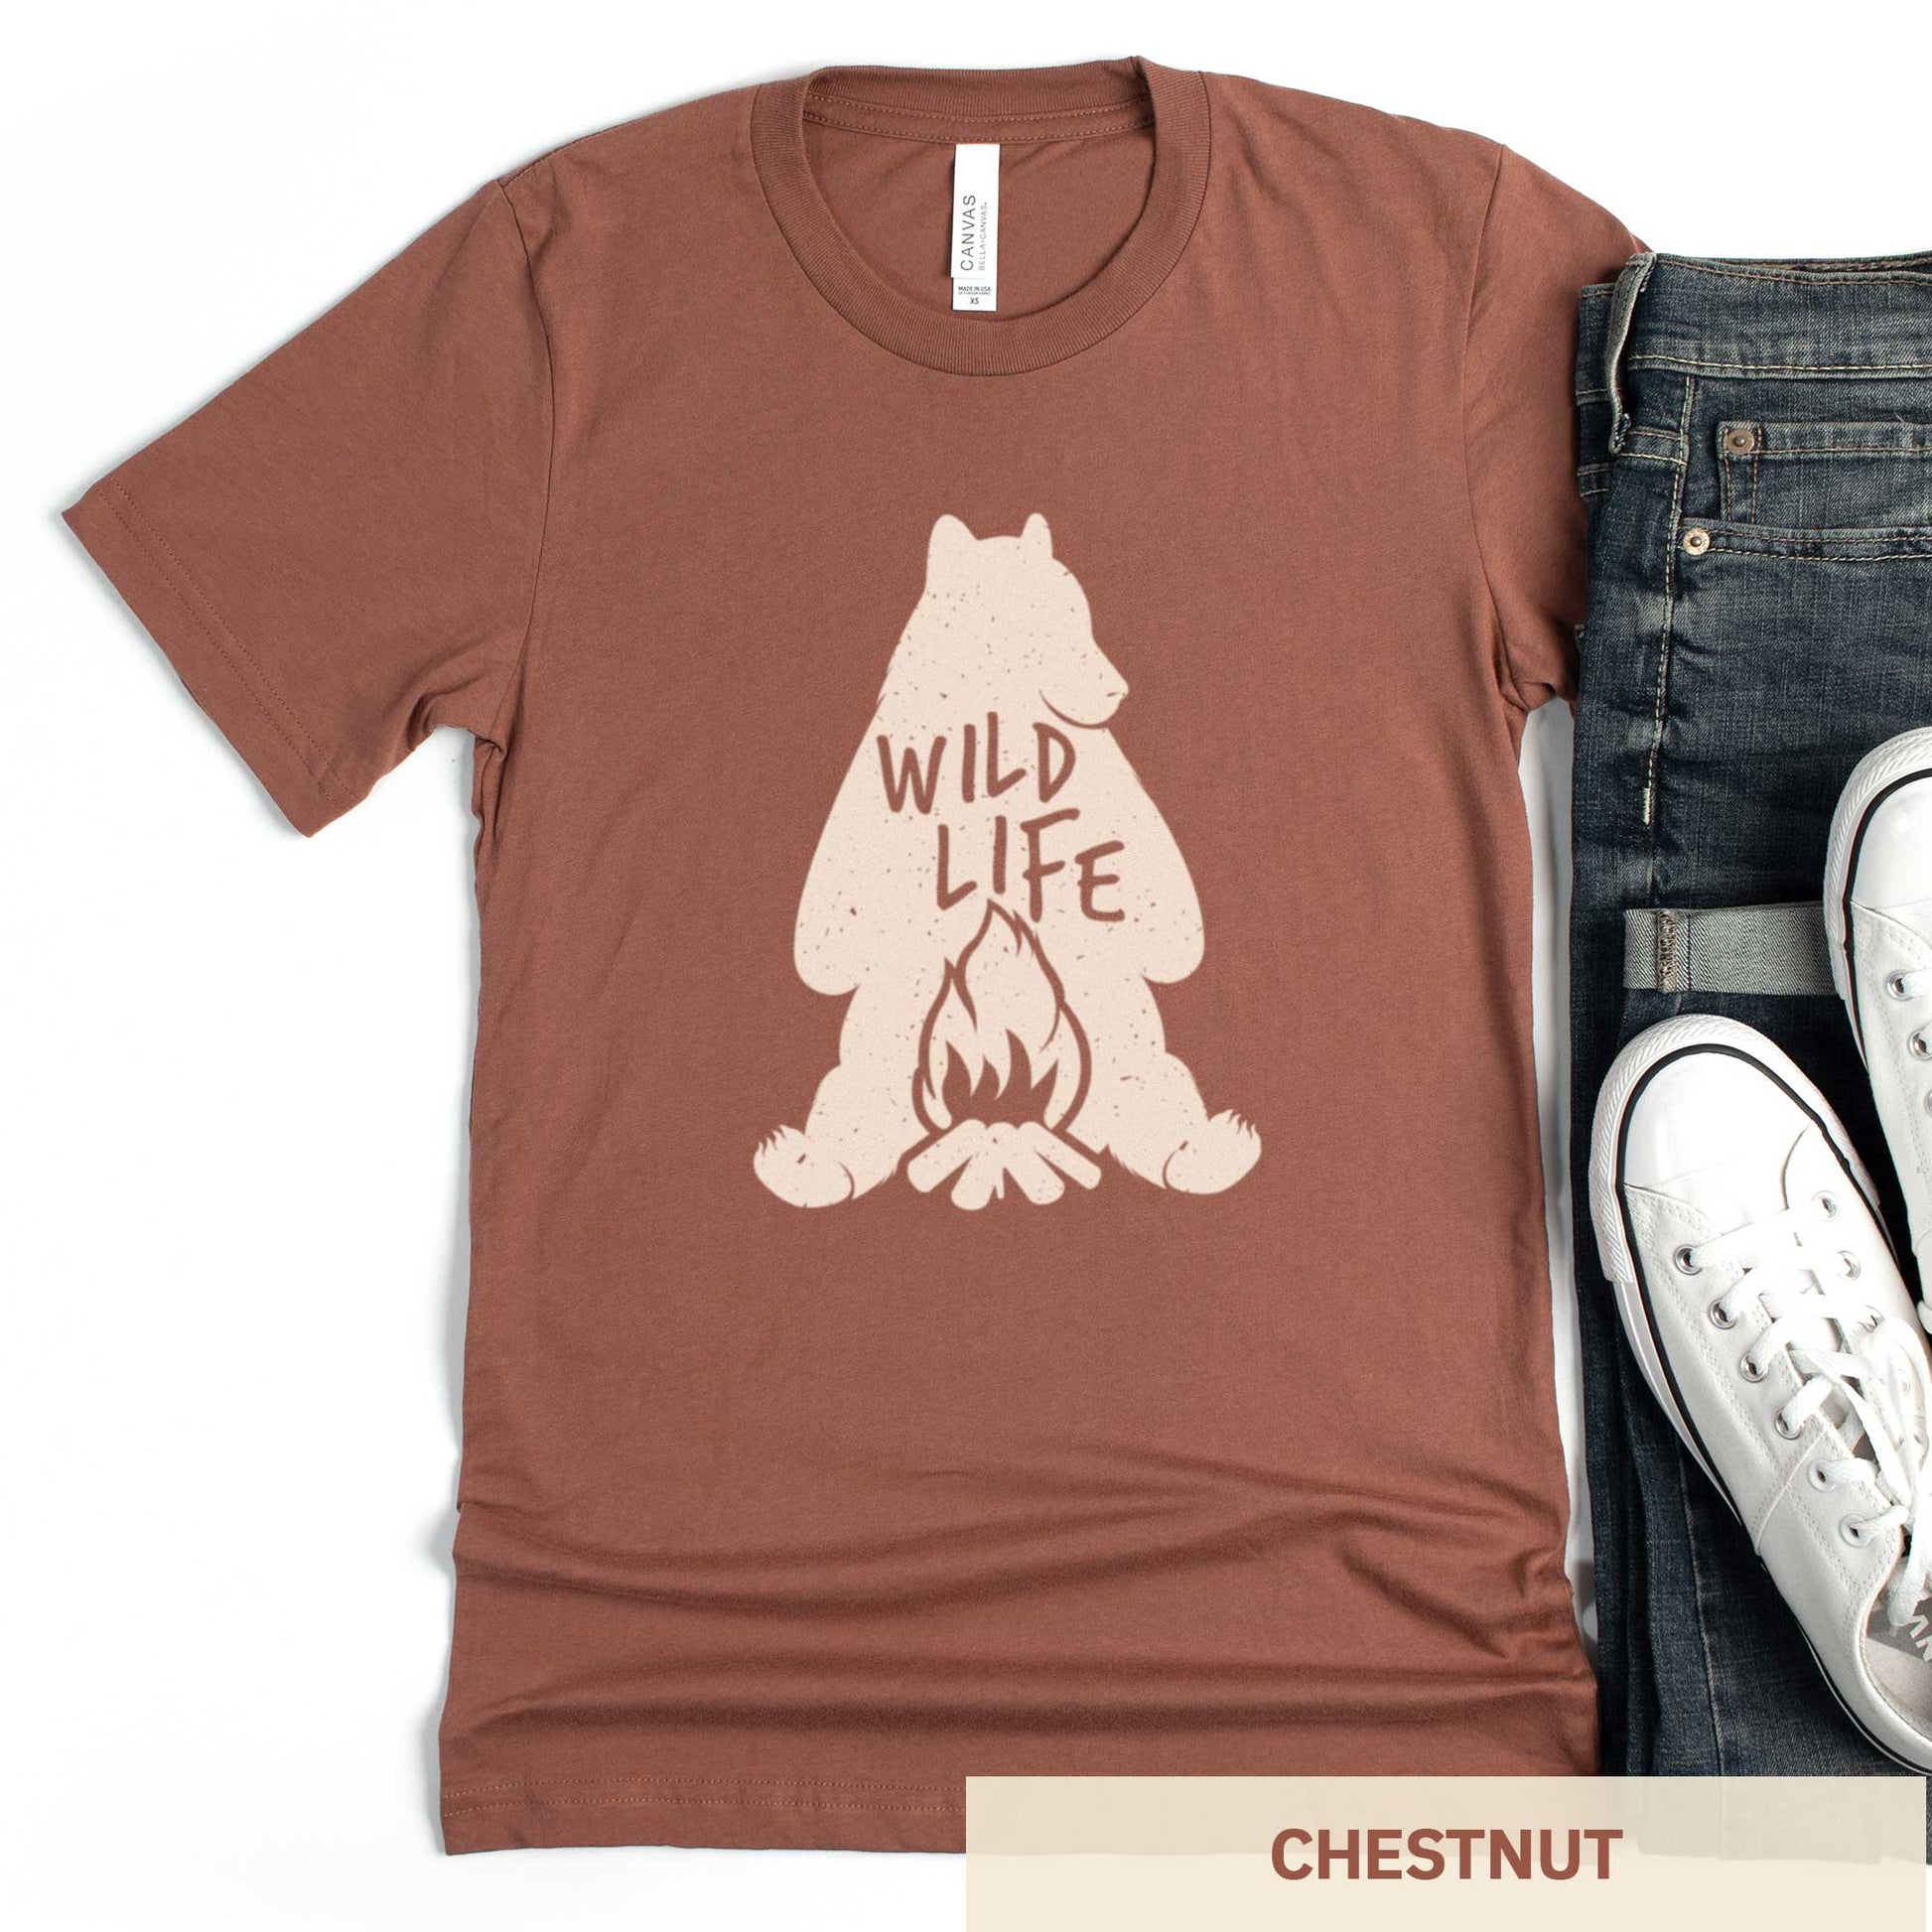 A chestnut cocoa brown Bella Canvas t-shirt featuring a silhouette of a grizzly bear sitting in front of a campfire with the words wild life.